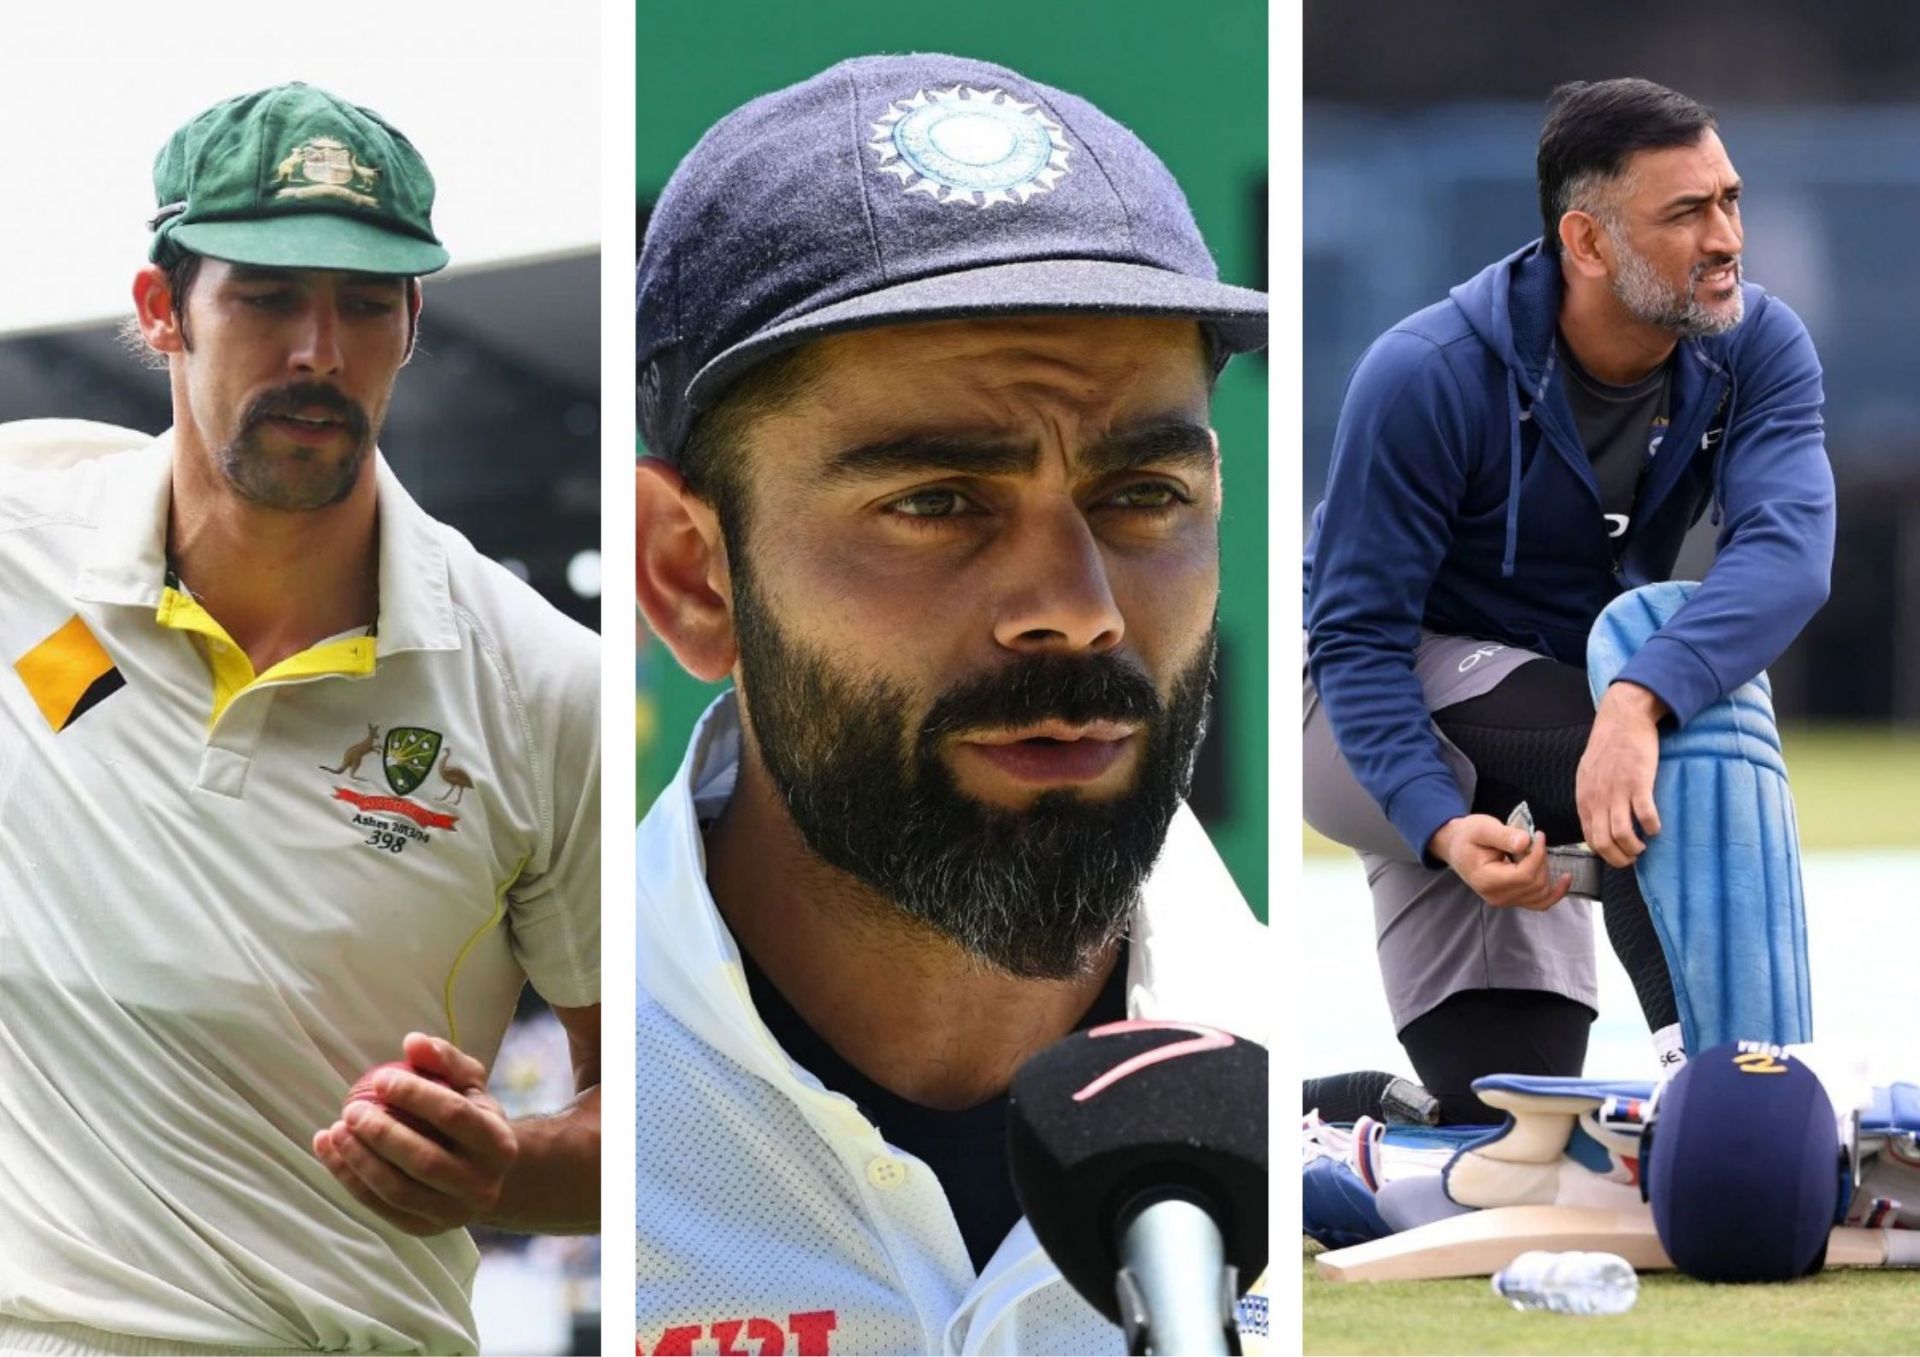 Facial hairstyles in cricket - a fashionable trend!